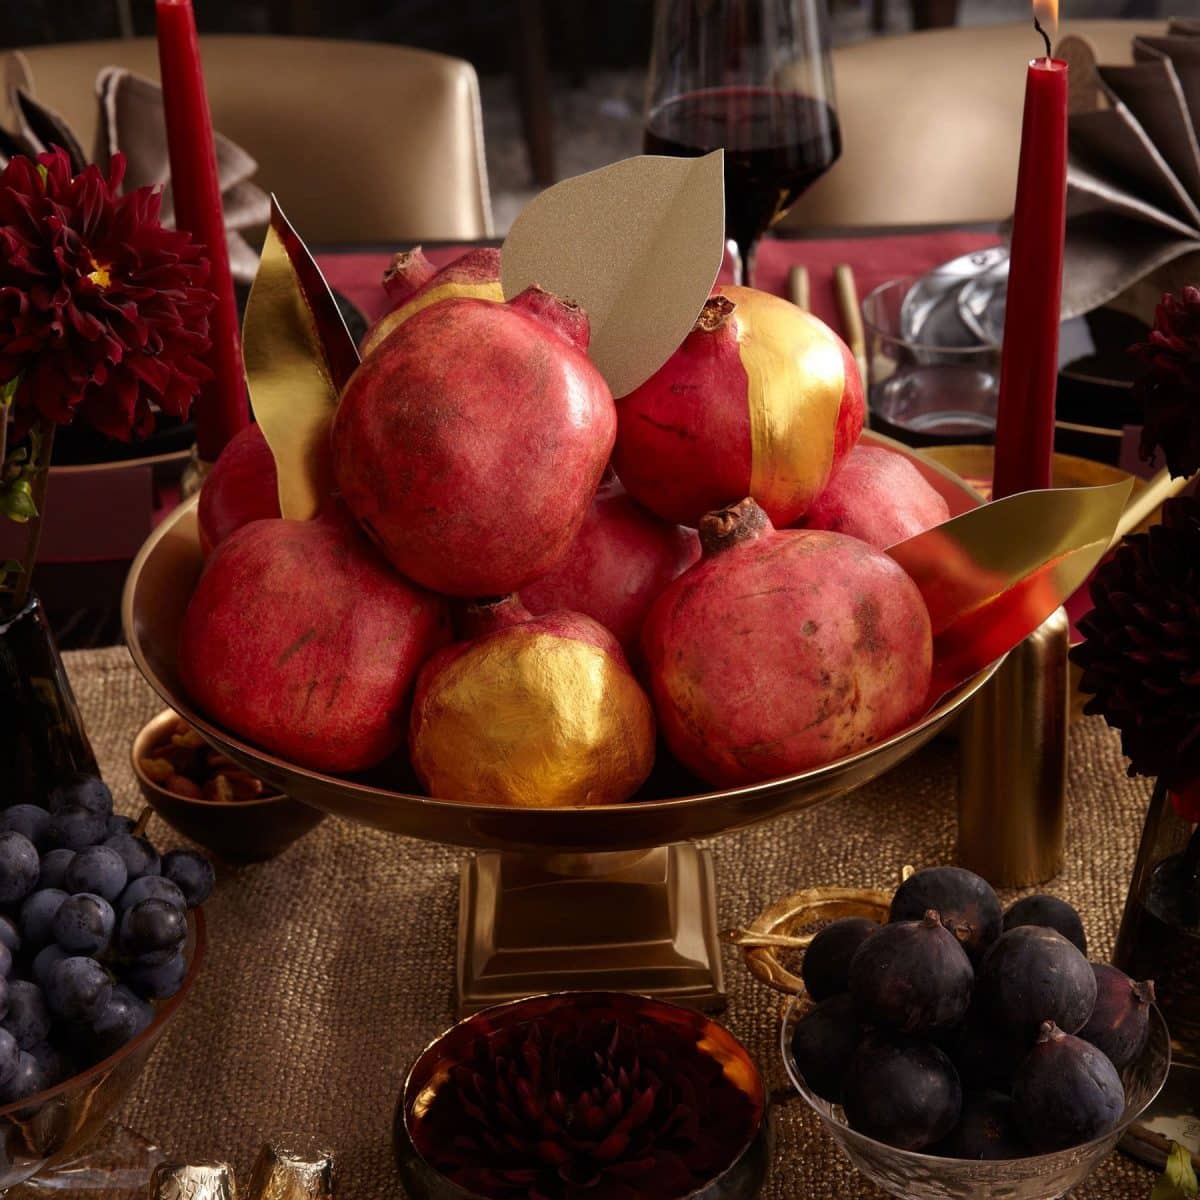 Darcy Miller Designs Pomegranate Thanksgiving Table Thanksgiving, Tablescape, Table Décor, Fall Décor, Autumn Décor, Pomegranate, Table Setting, Centerpiece Inspiration, Gold Paint